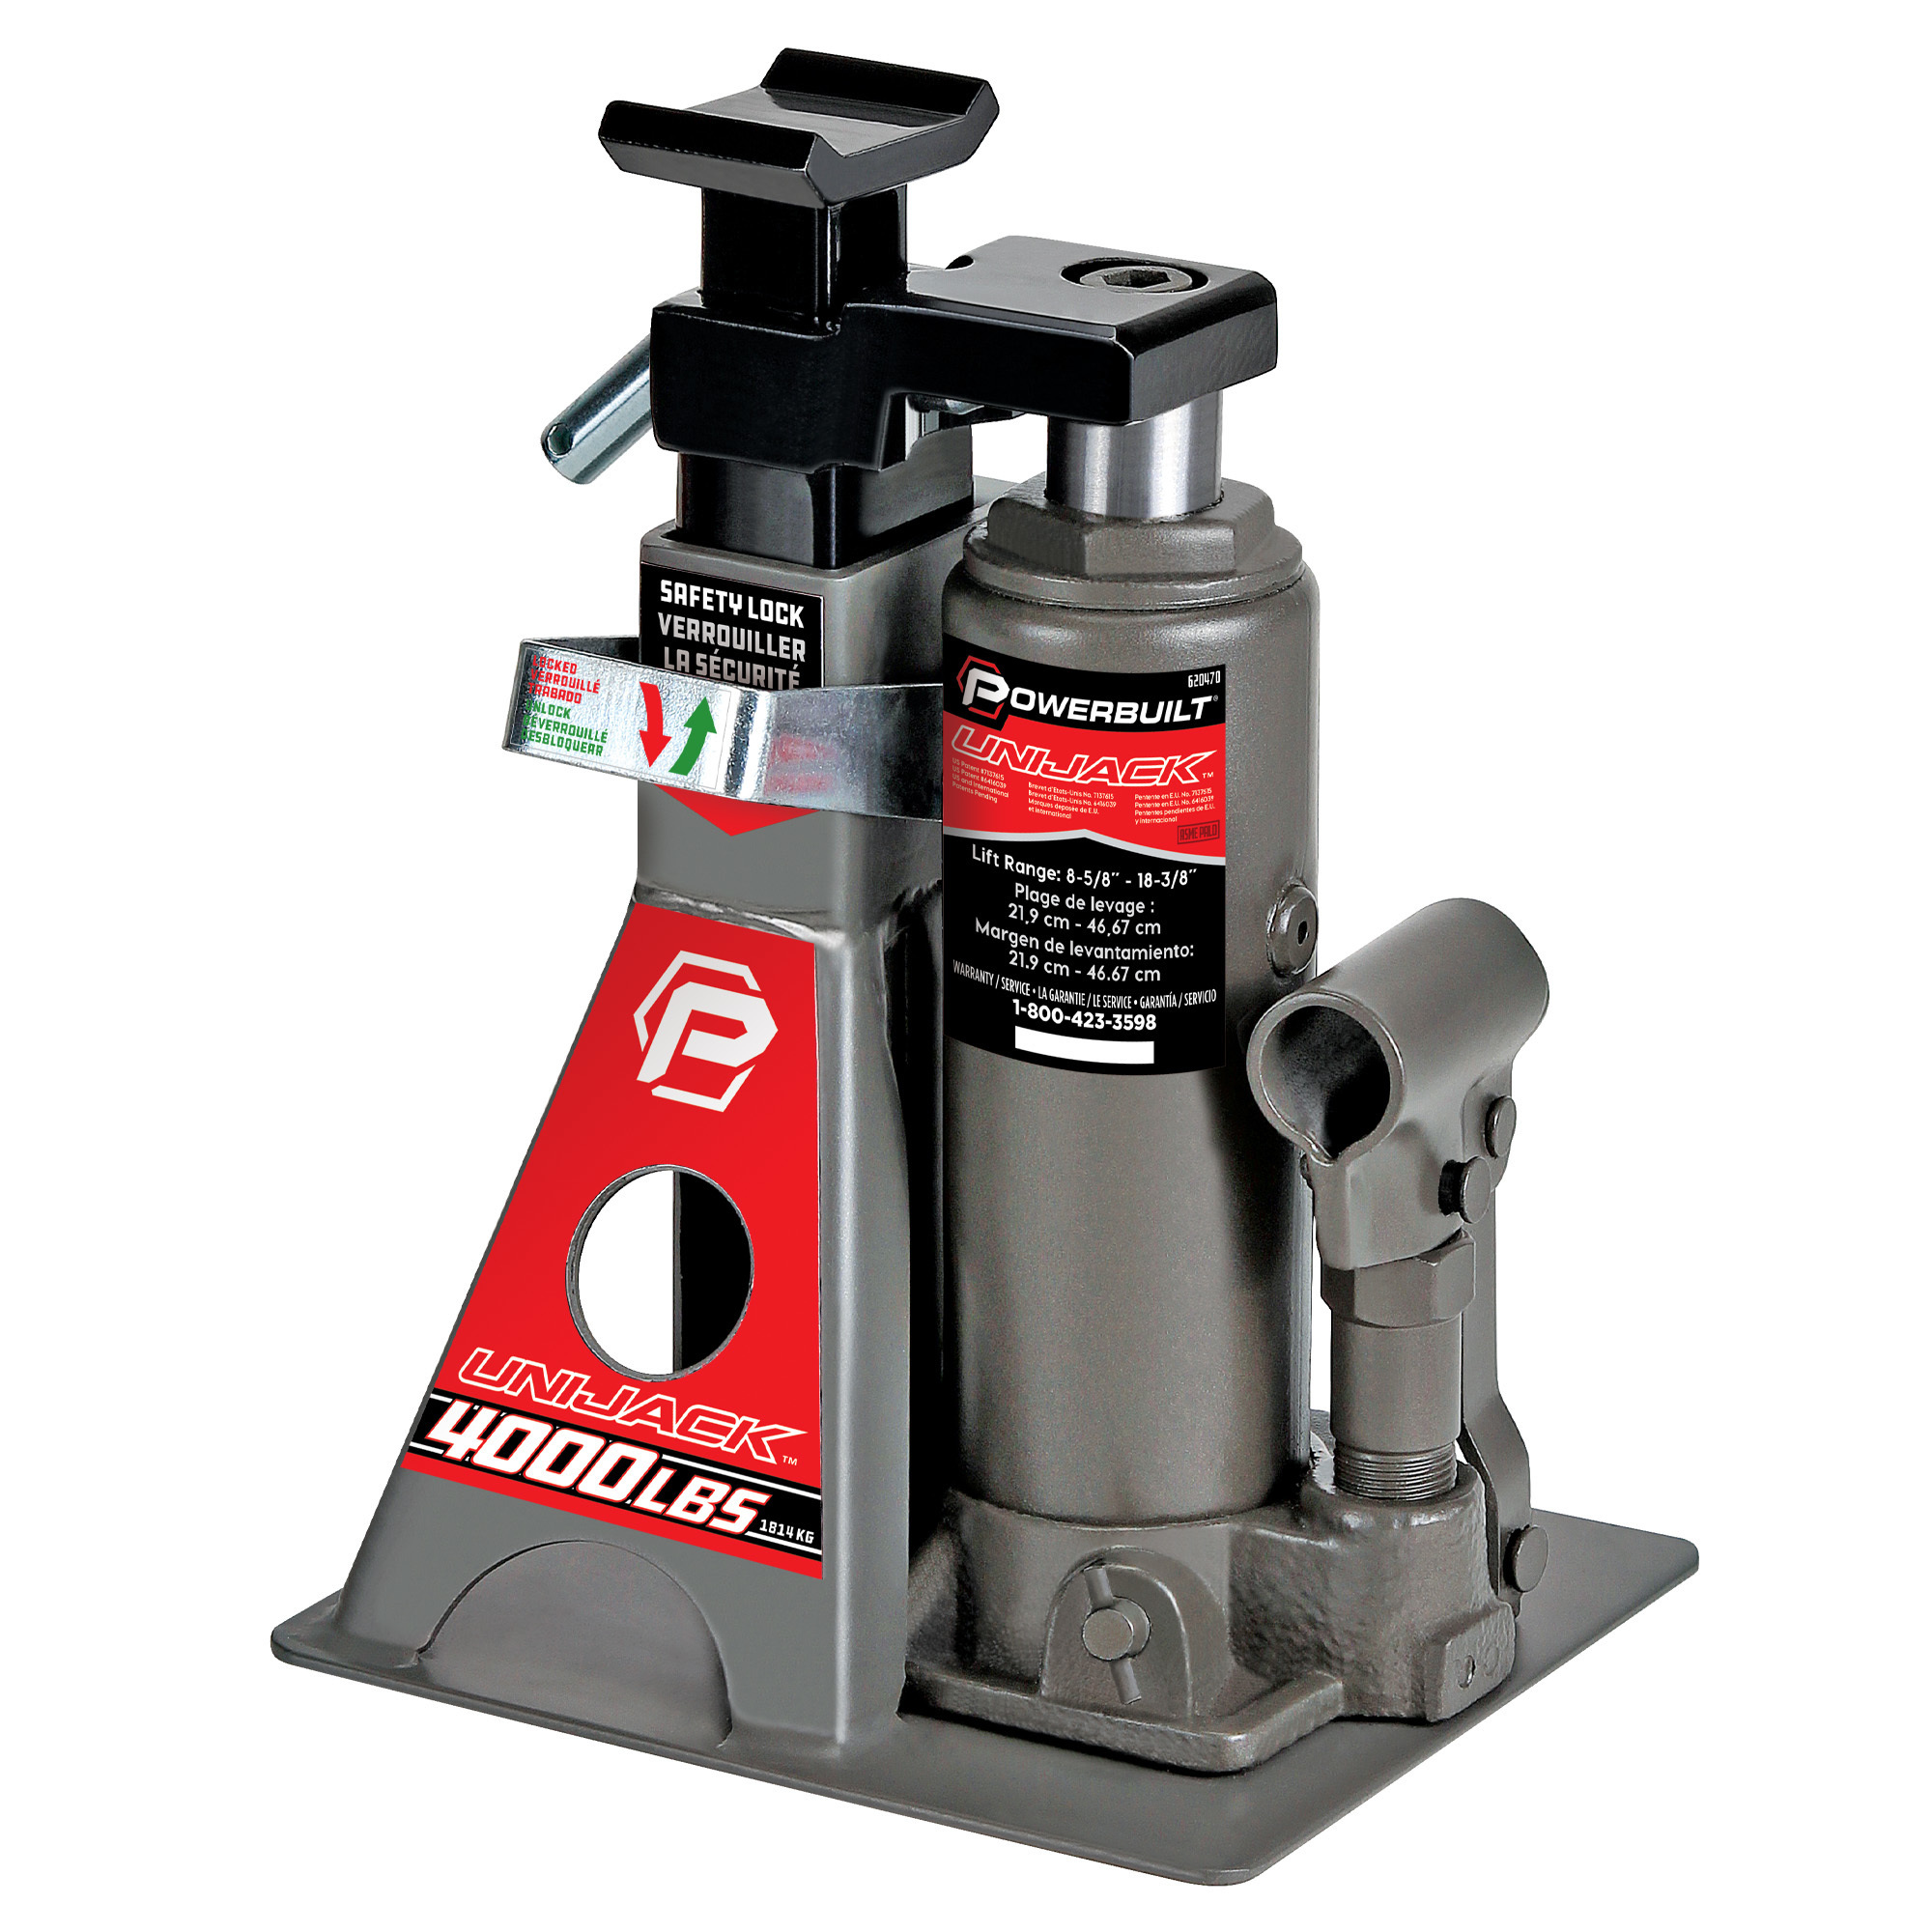 Powerbuilt, 2 Ton Unijack Bottle Jack and Jackstand in One, Lift Capacity 2 Tons, Max. Lift Height 18.375 in, Model 620470